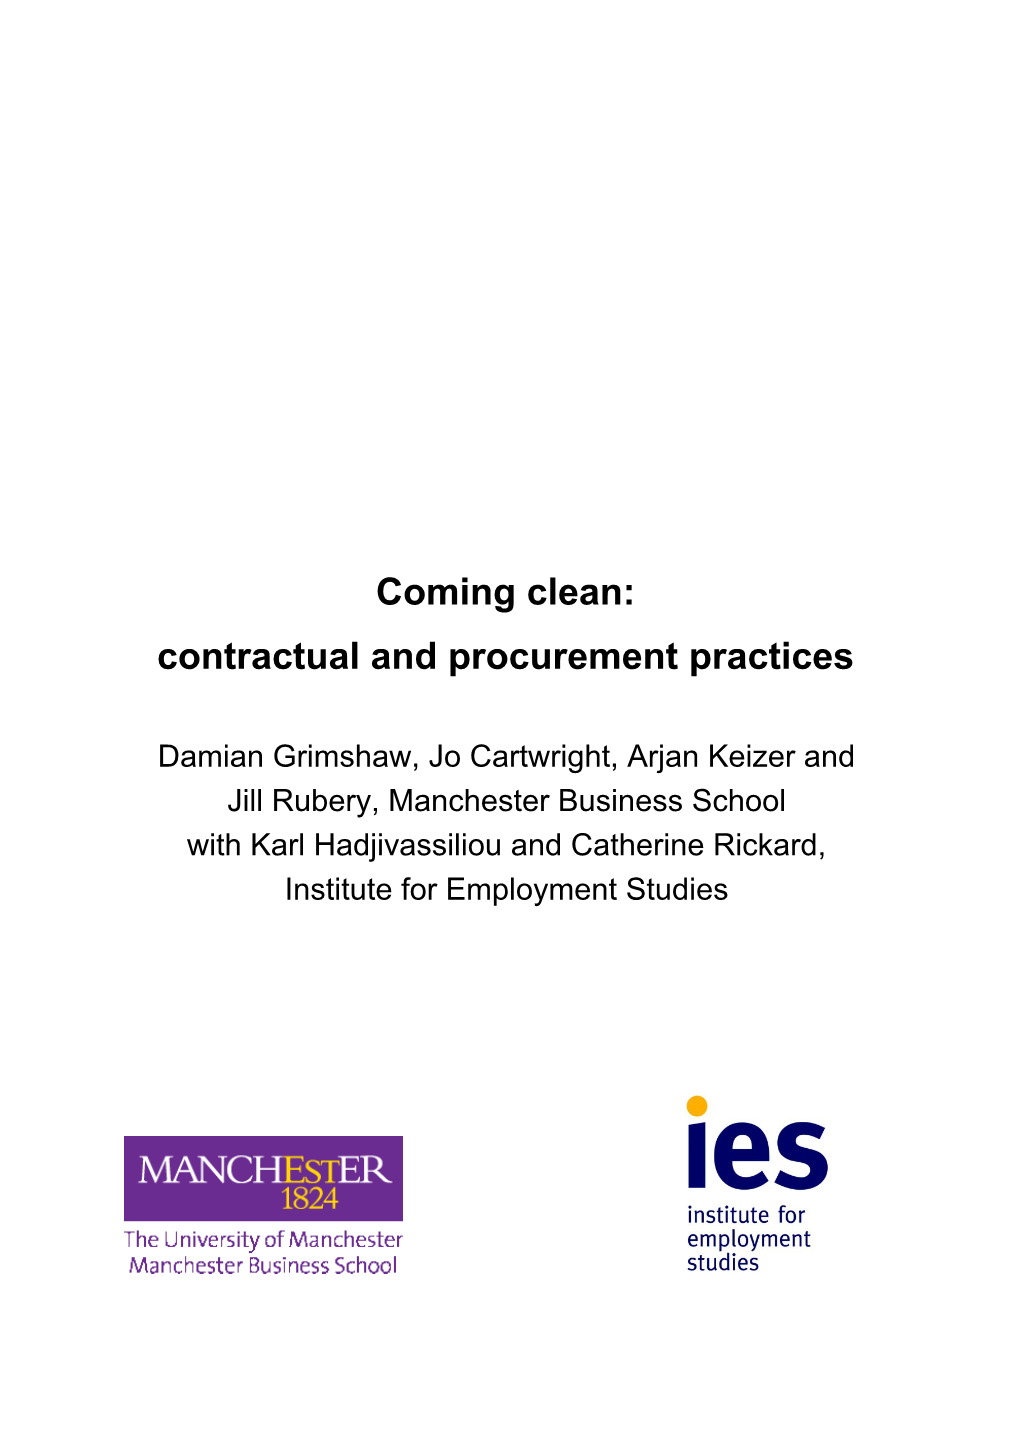 Contractual and Procurement Practices in the Outsourced Cleaning Sector